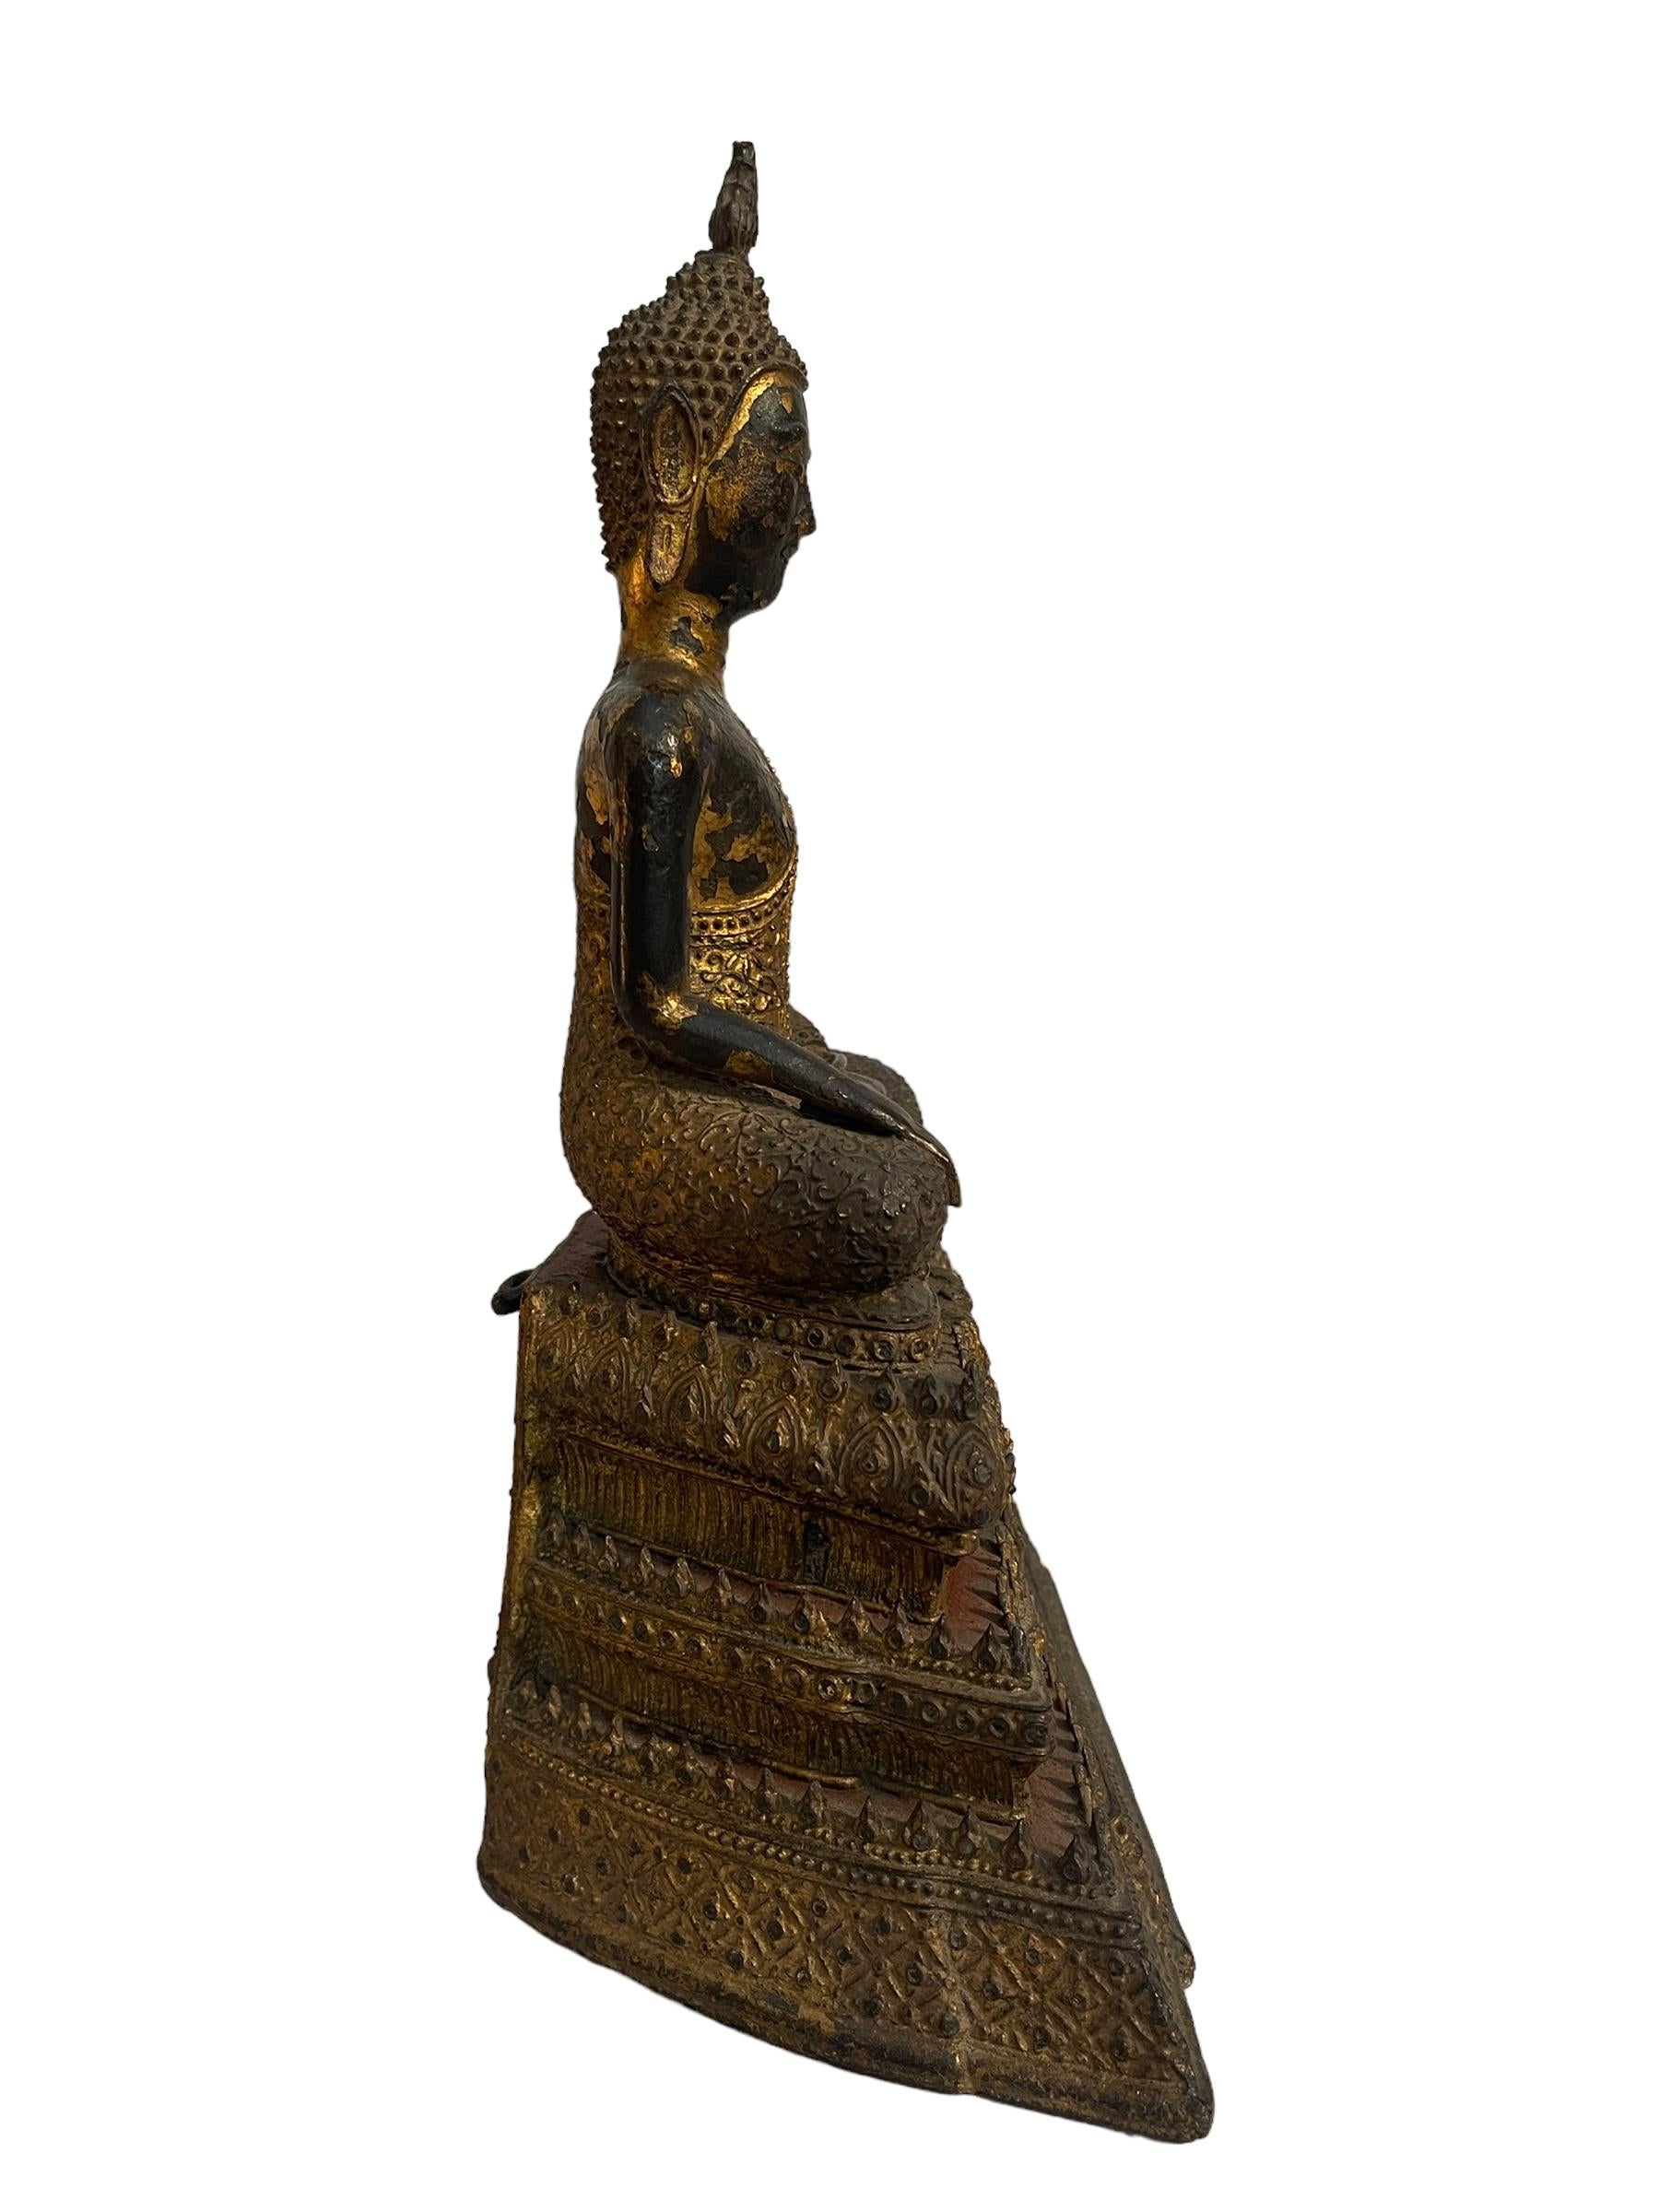 Elegant statue of Buddha in meditation, originating from South East Asia, dating back to the late 1800s and early 1900s, it is made with an internal structure that acts as a base for the work in a clay-like mixture, and is entirely covered with gilt